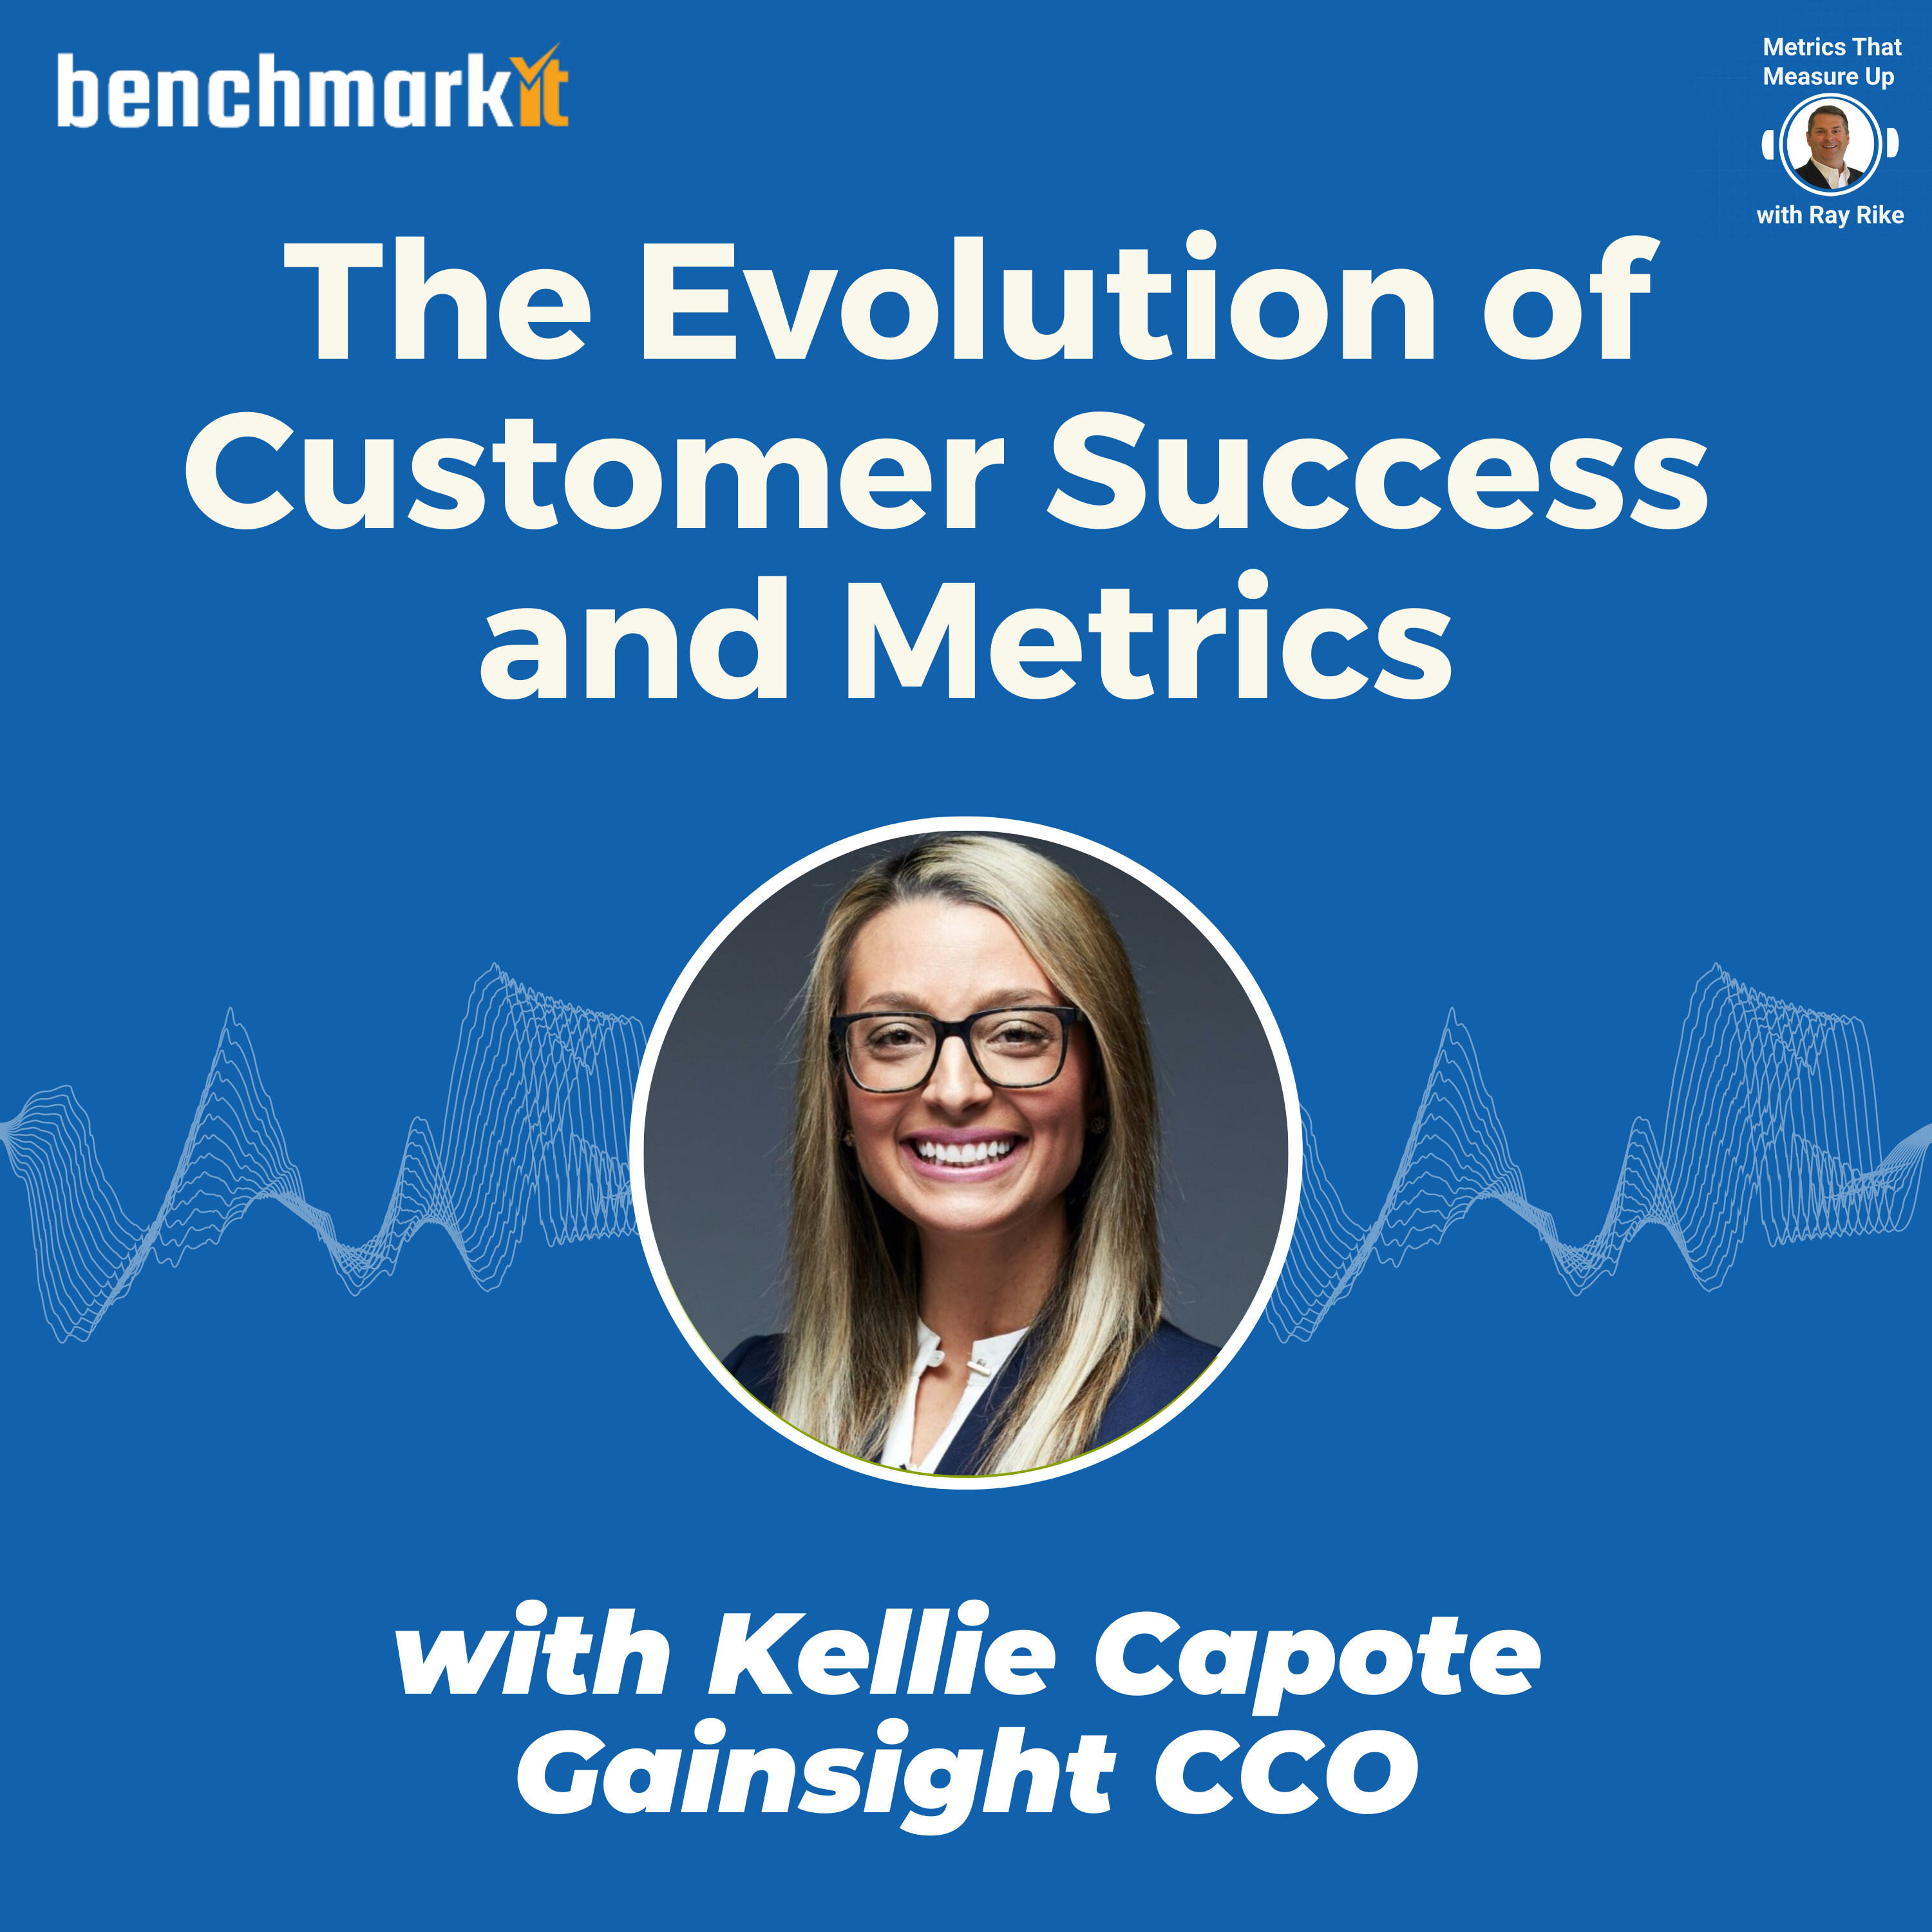 Evolution of Customer Success by the Numbers - Kellie Capote, Chief Customer Officer Gainsight